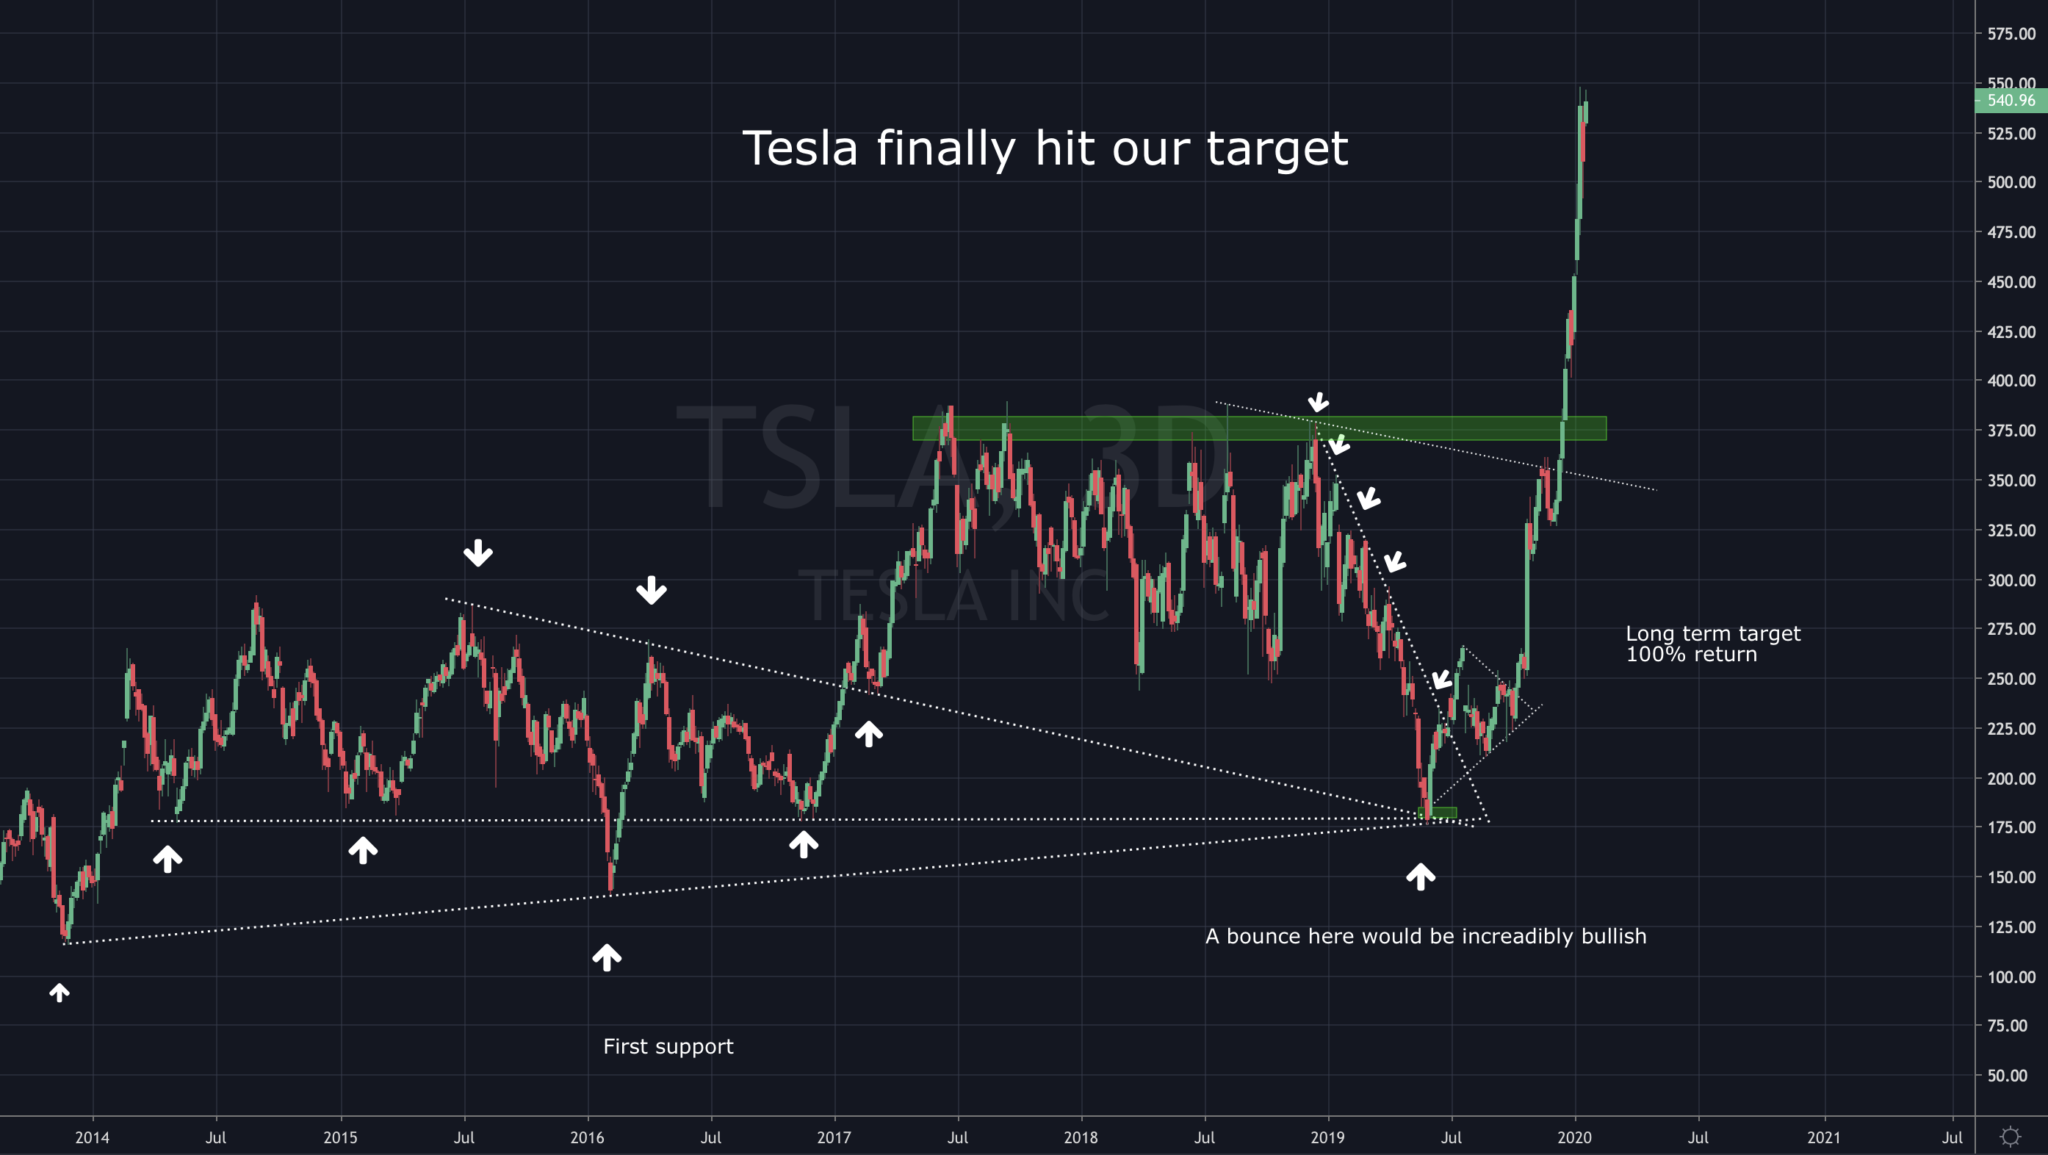 Tesla trade over - Caribbean Value Investor - Articles and Analysis